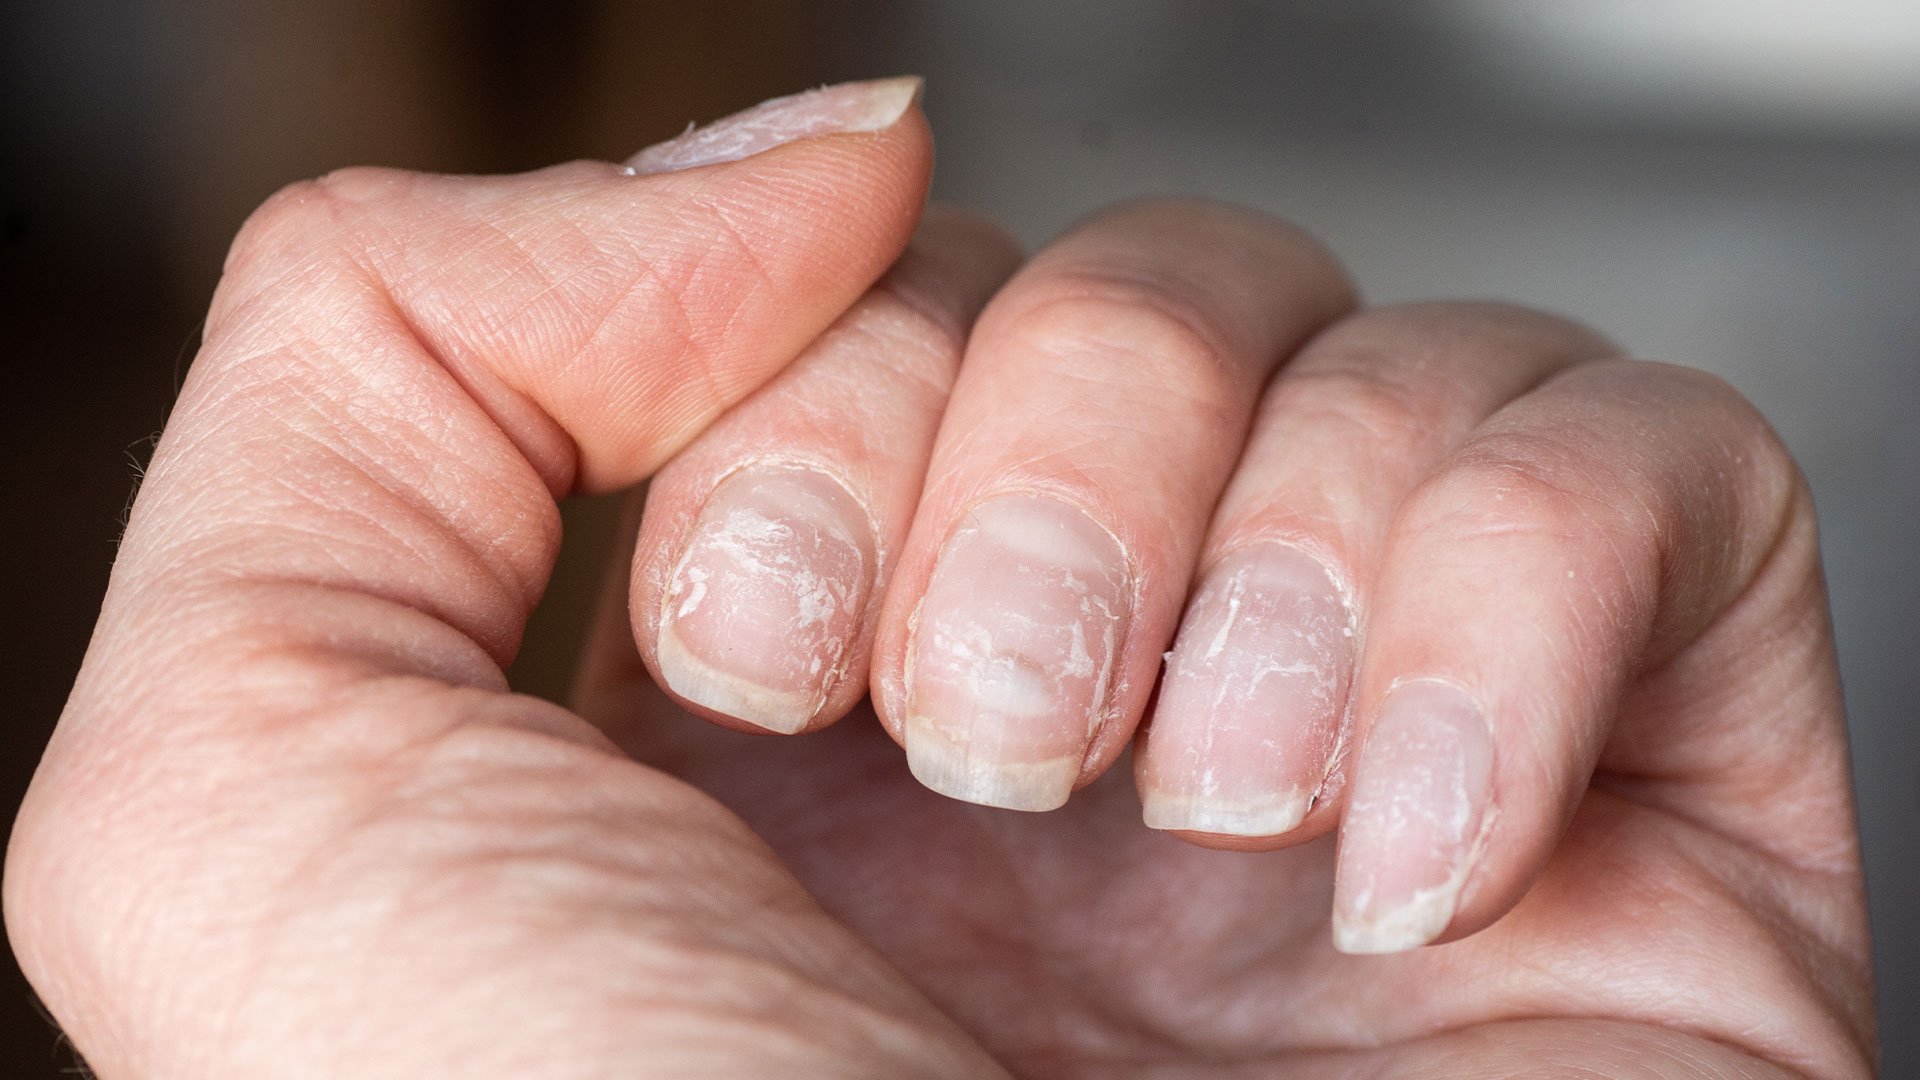 Treatment for Nail Psoriasis: Topicals, Injections, Lasers